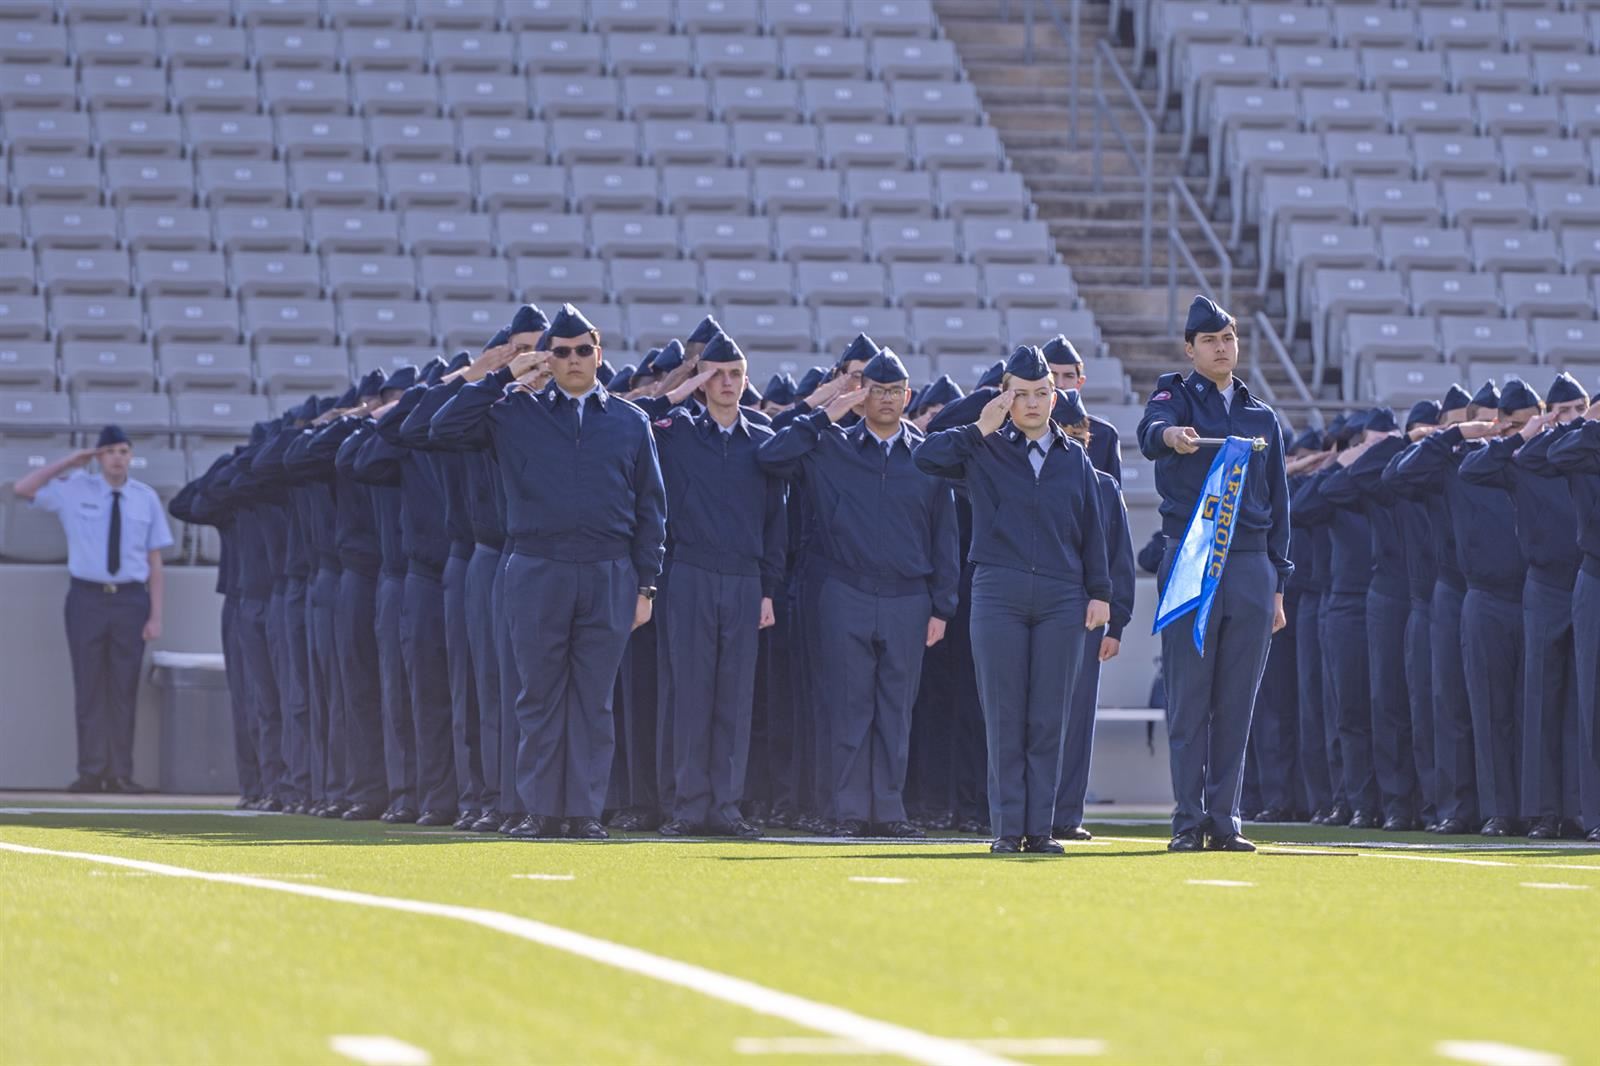 Each of CFISD’s nine Air Force Junior ROTC units displayed their discipline and uniformity.